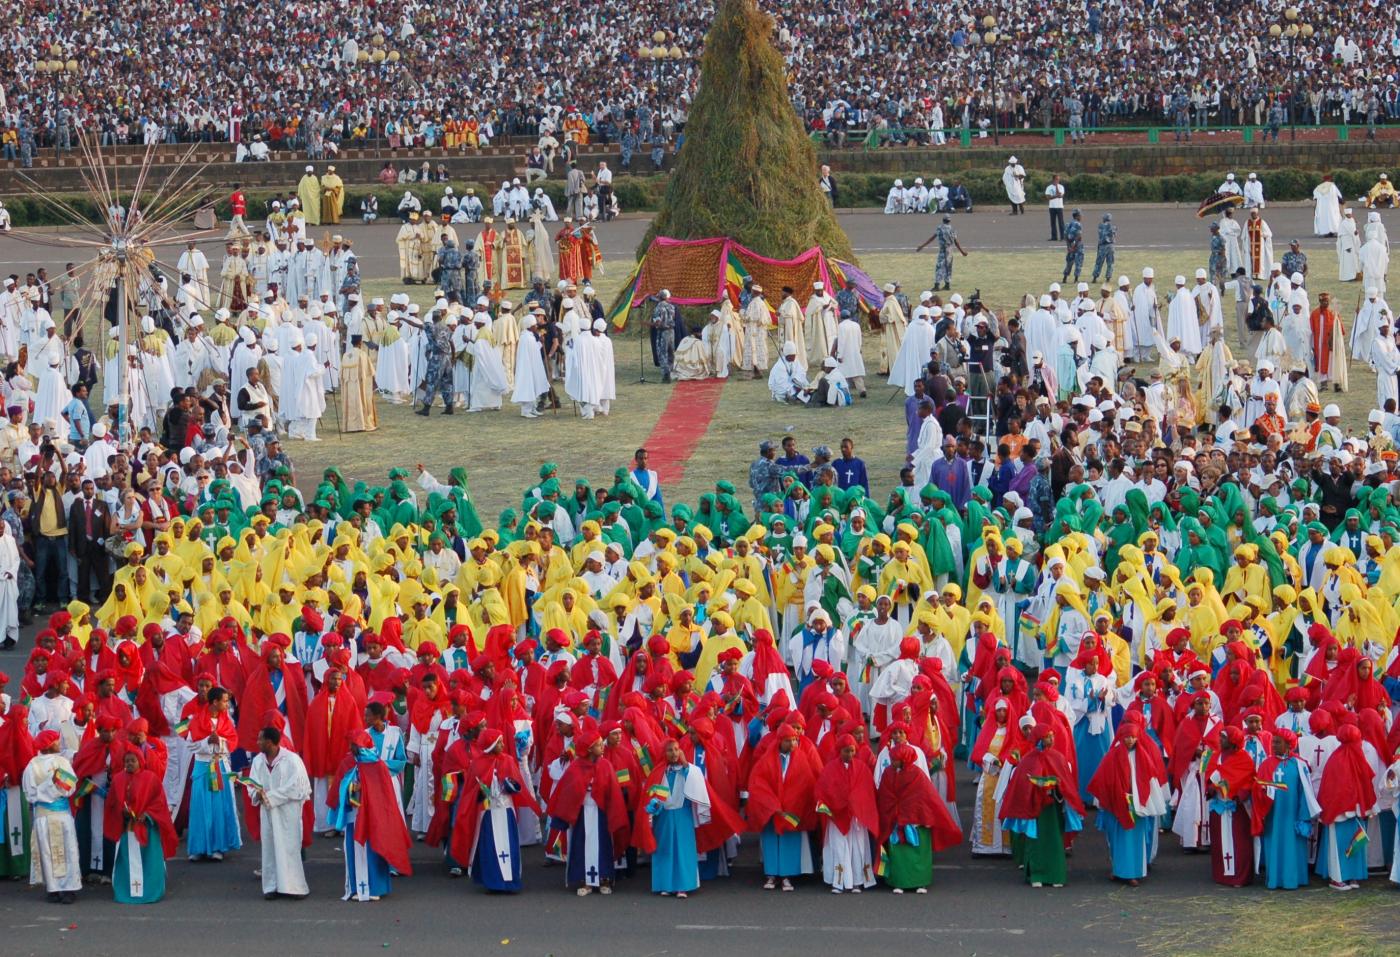 Ethiopians during the Meskel, the festival of the True Cross at the Meskel Square in Addis Ababam celebrated in its current form for more than 600 years. Photo: Fredrick Nzwili/WCC